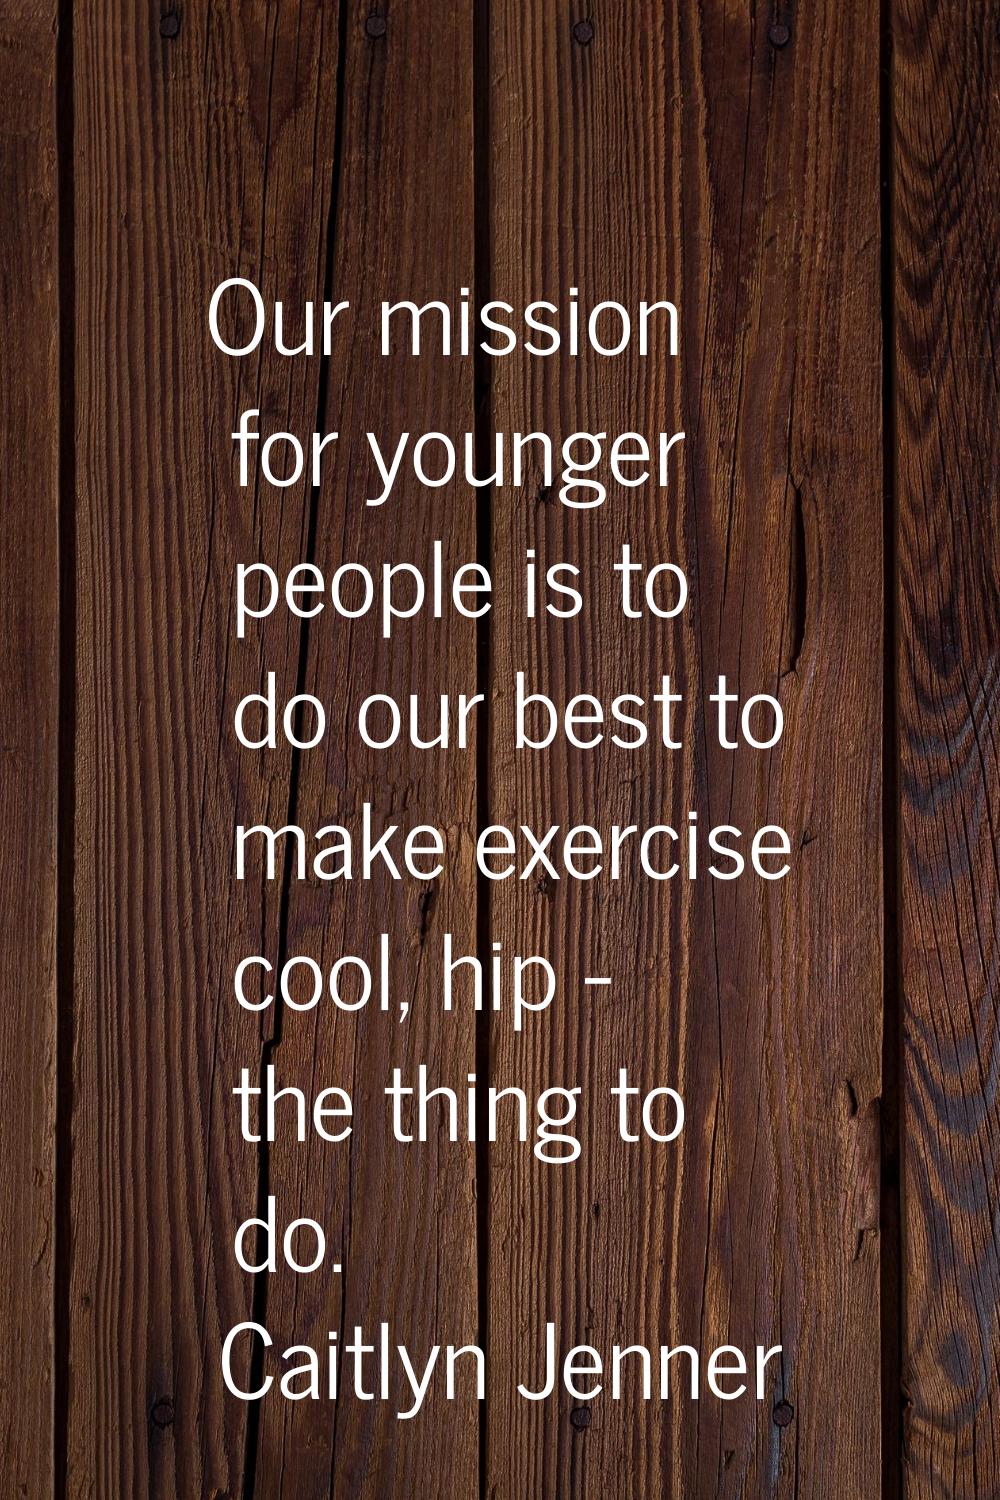 Our mission for younger people is to do our best to make exercise cool, hip - the thing to do.